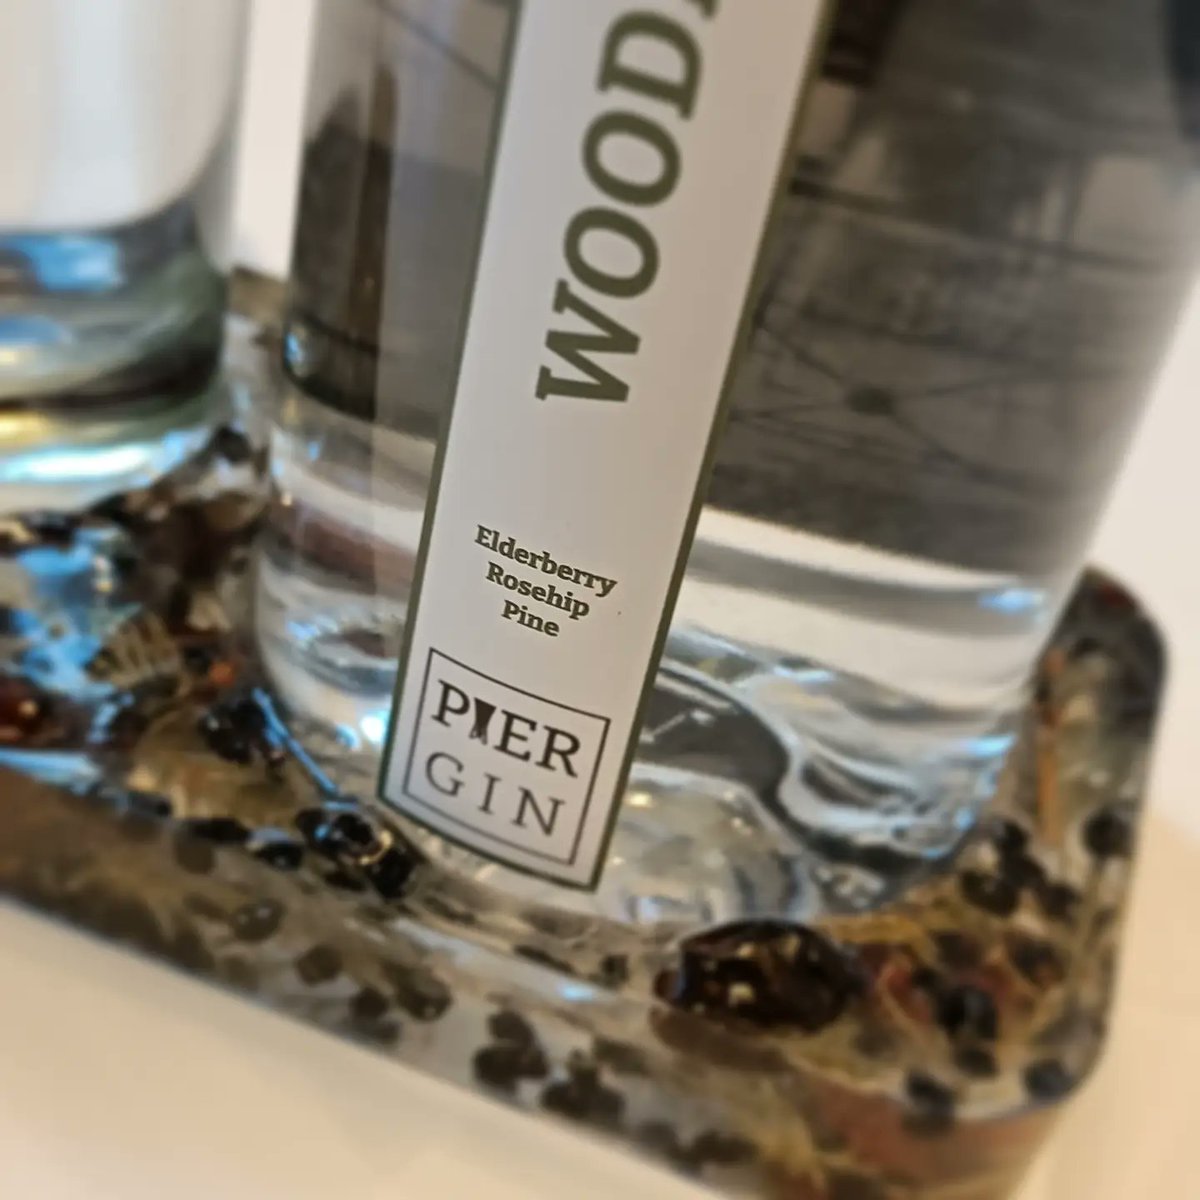 Our very clever team member and neighbour @clairegaskarth has done it again. 

This time a WOODLAND bottle stand with elderberries, rosehips and pine.

#PierGin #Local #Gin #Clevedon #NorthSomerset #Somerset #discoverclevedon #facesofclevedon #independentclevedon #ginfanatics